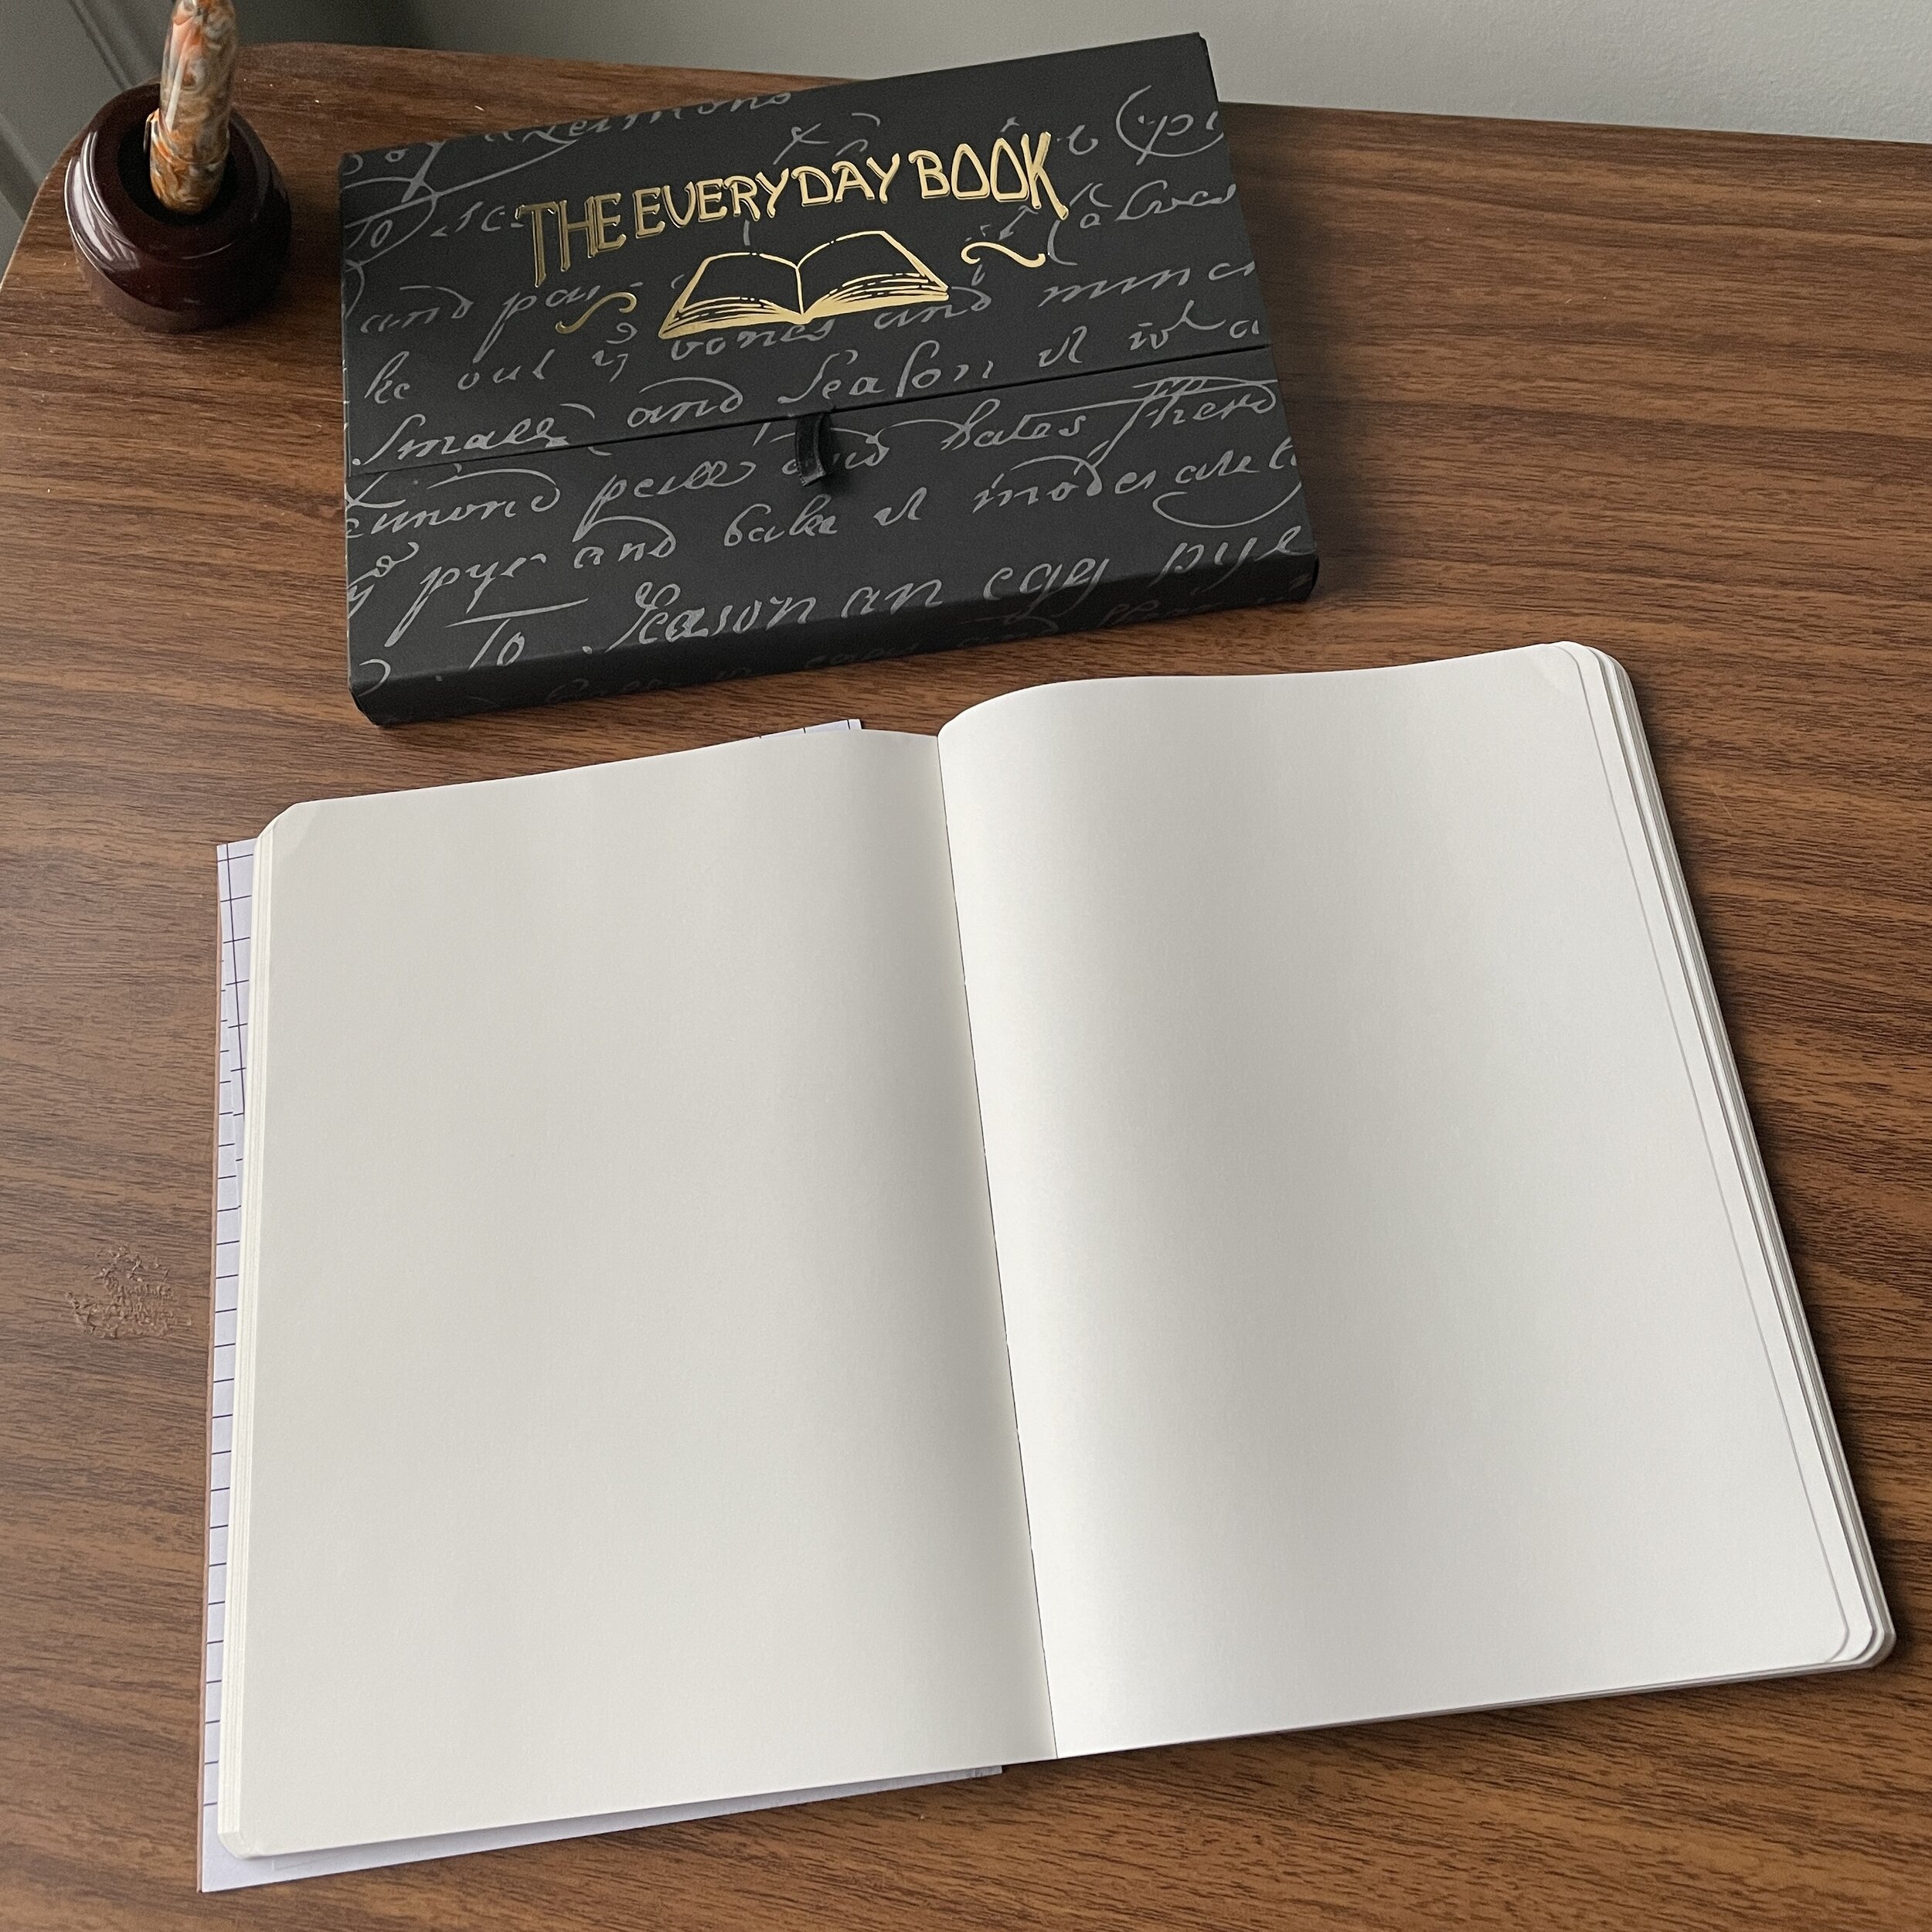 Everyday Blank Notebook - Tomoe River Paper - A5 Size - 400 Pages